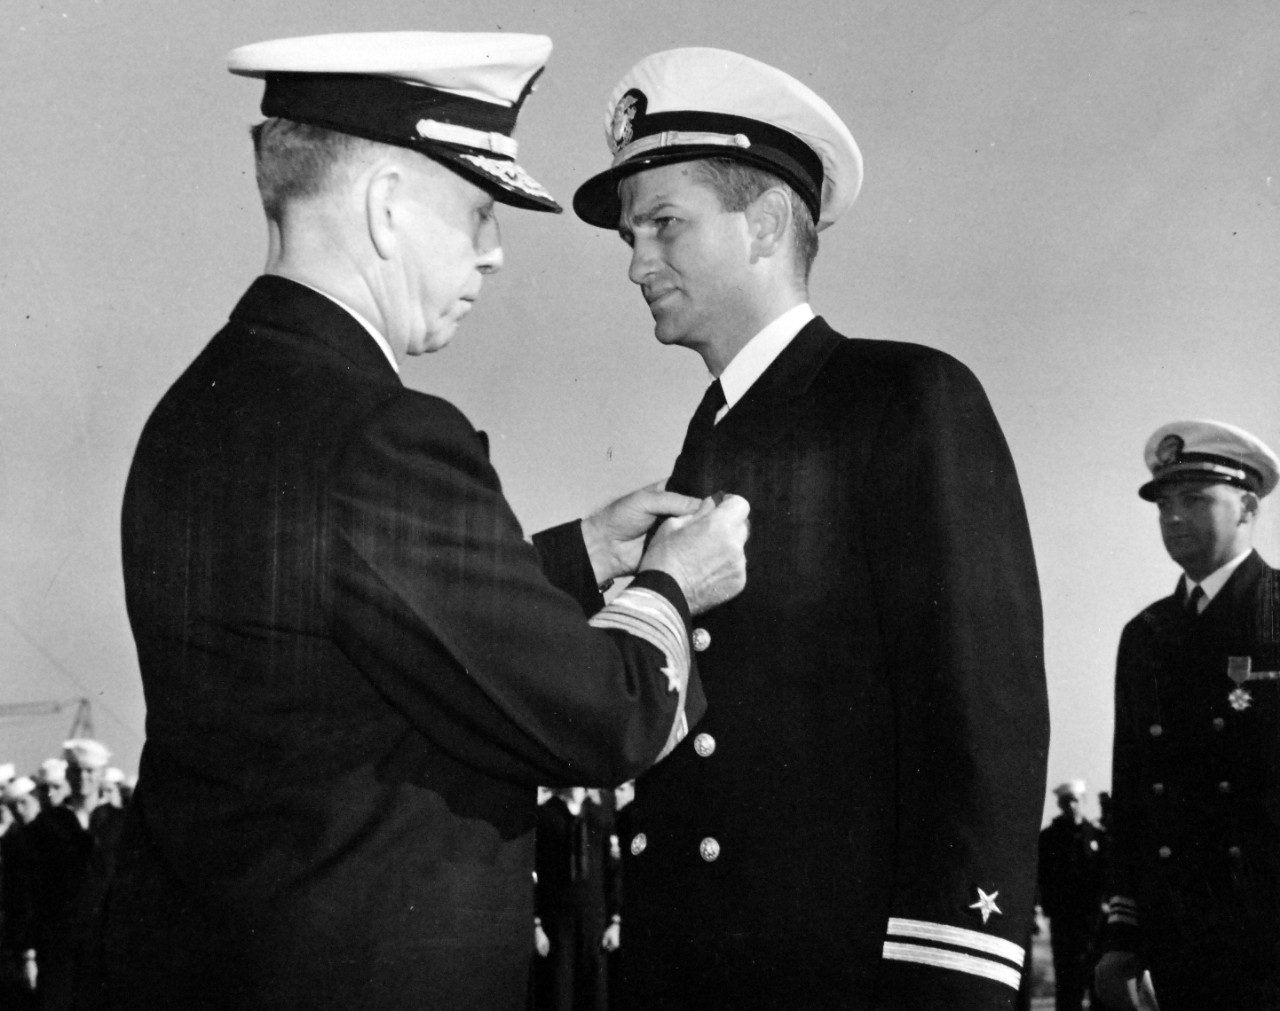 <p>80-G-43654: Sinking of German U-boat, U-405. Lieutenant Chas H. Hutchins, USNR, on the flight deck of USS Card (CVE-11) as Admiral Royal E. Ingersoll, USN, Commander-in-Chief of the Atlantic Fleet, pins on his chest the Navy Cross. Hutchins commanded the heroic USS Borie (DD 215), sinking German submarine U 405 on November 1, 1943. The award was made recently at an East Coast port on the occasion of the conferring of the Presidential Unit Citation on the Card, her air squadrons and her escorting destroyers. Photograph released November 10, 1943.&nbsp;</p>
